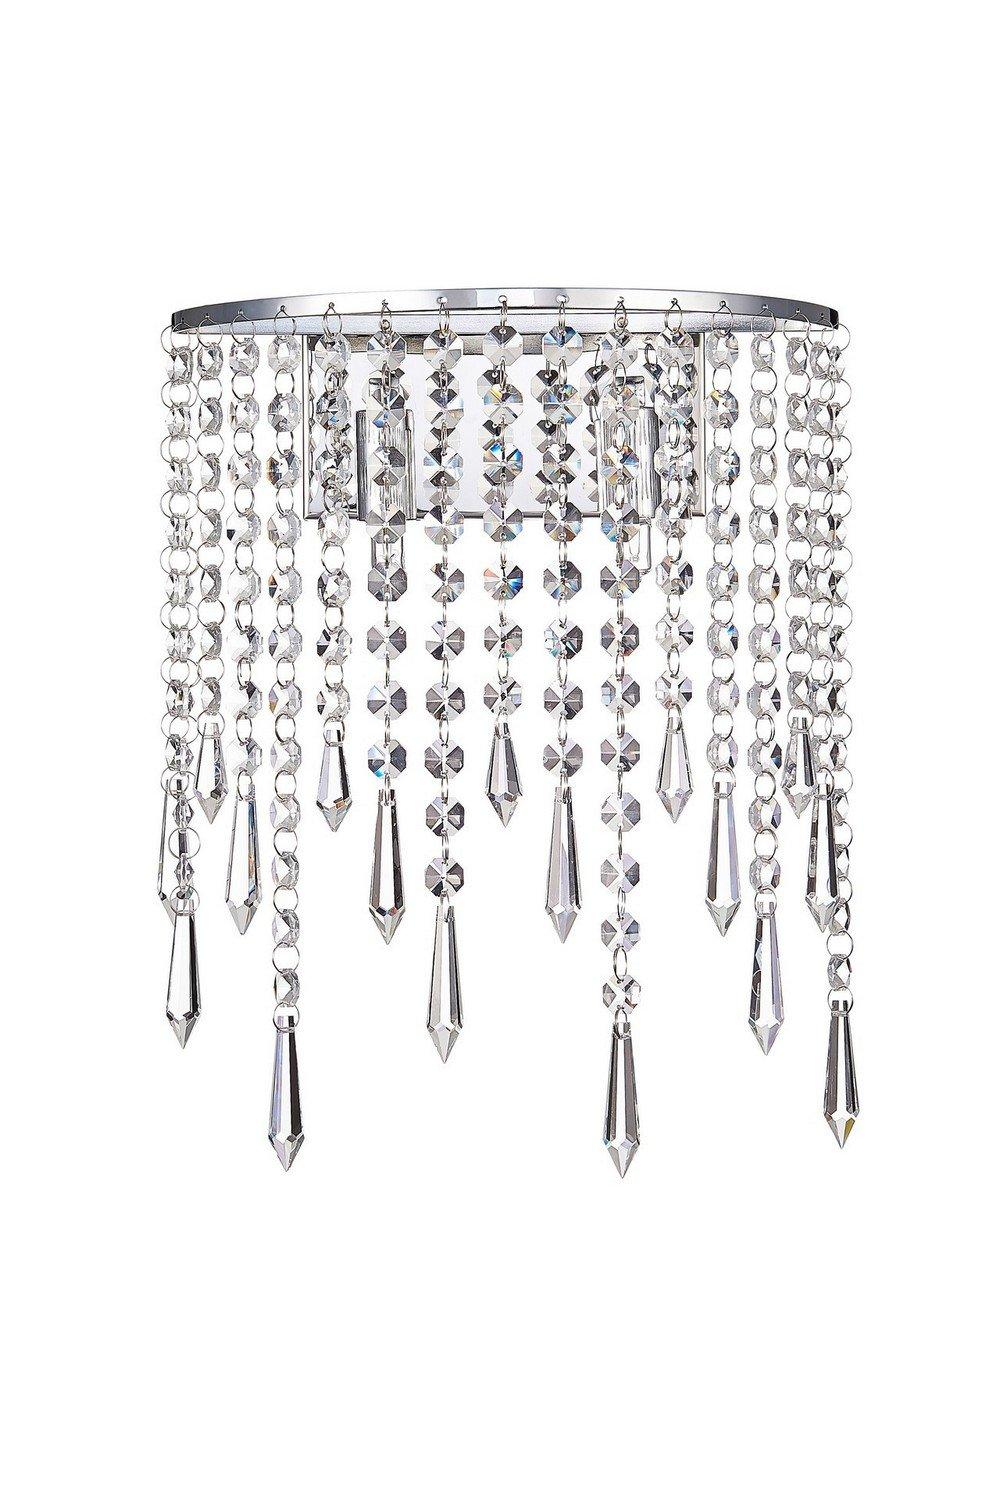 Contemporary Wall Lamp Chrome Hanging Crystal